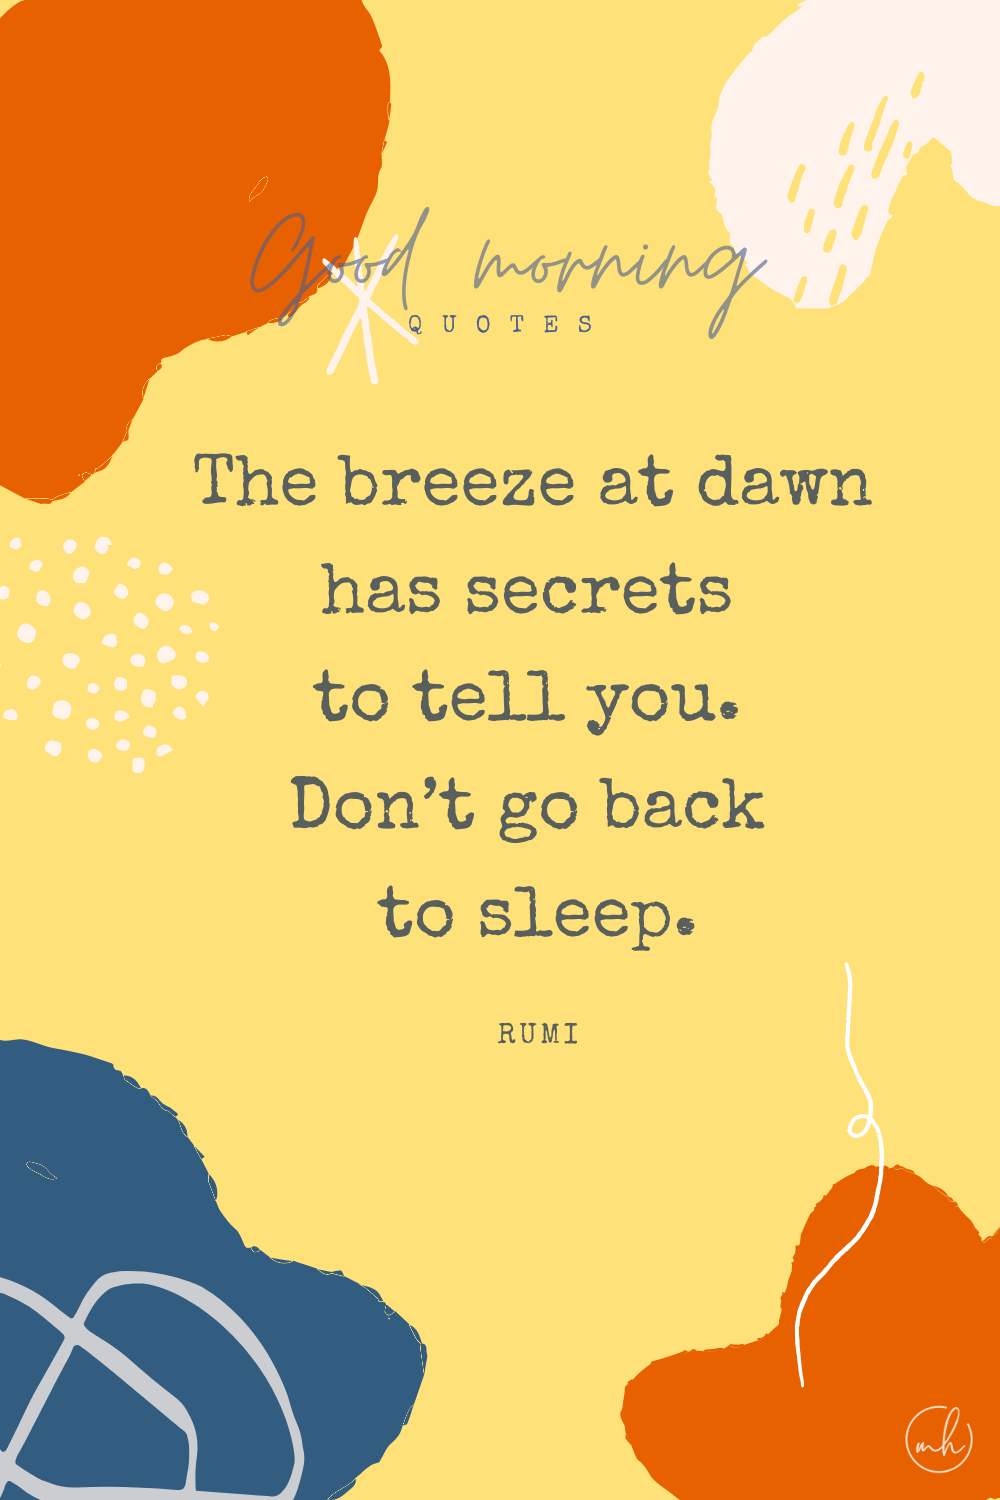 "The breeze at dawn has secrets to tell you. Don’t go back to sleep." – Rumi